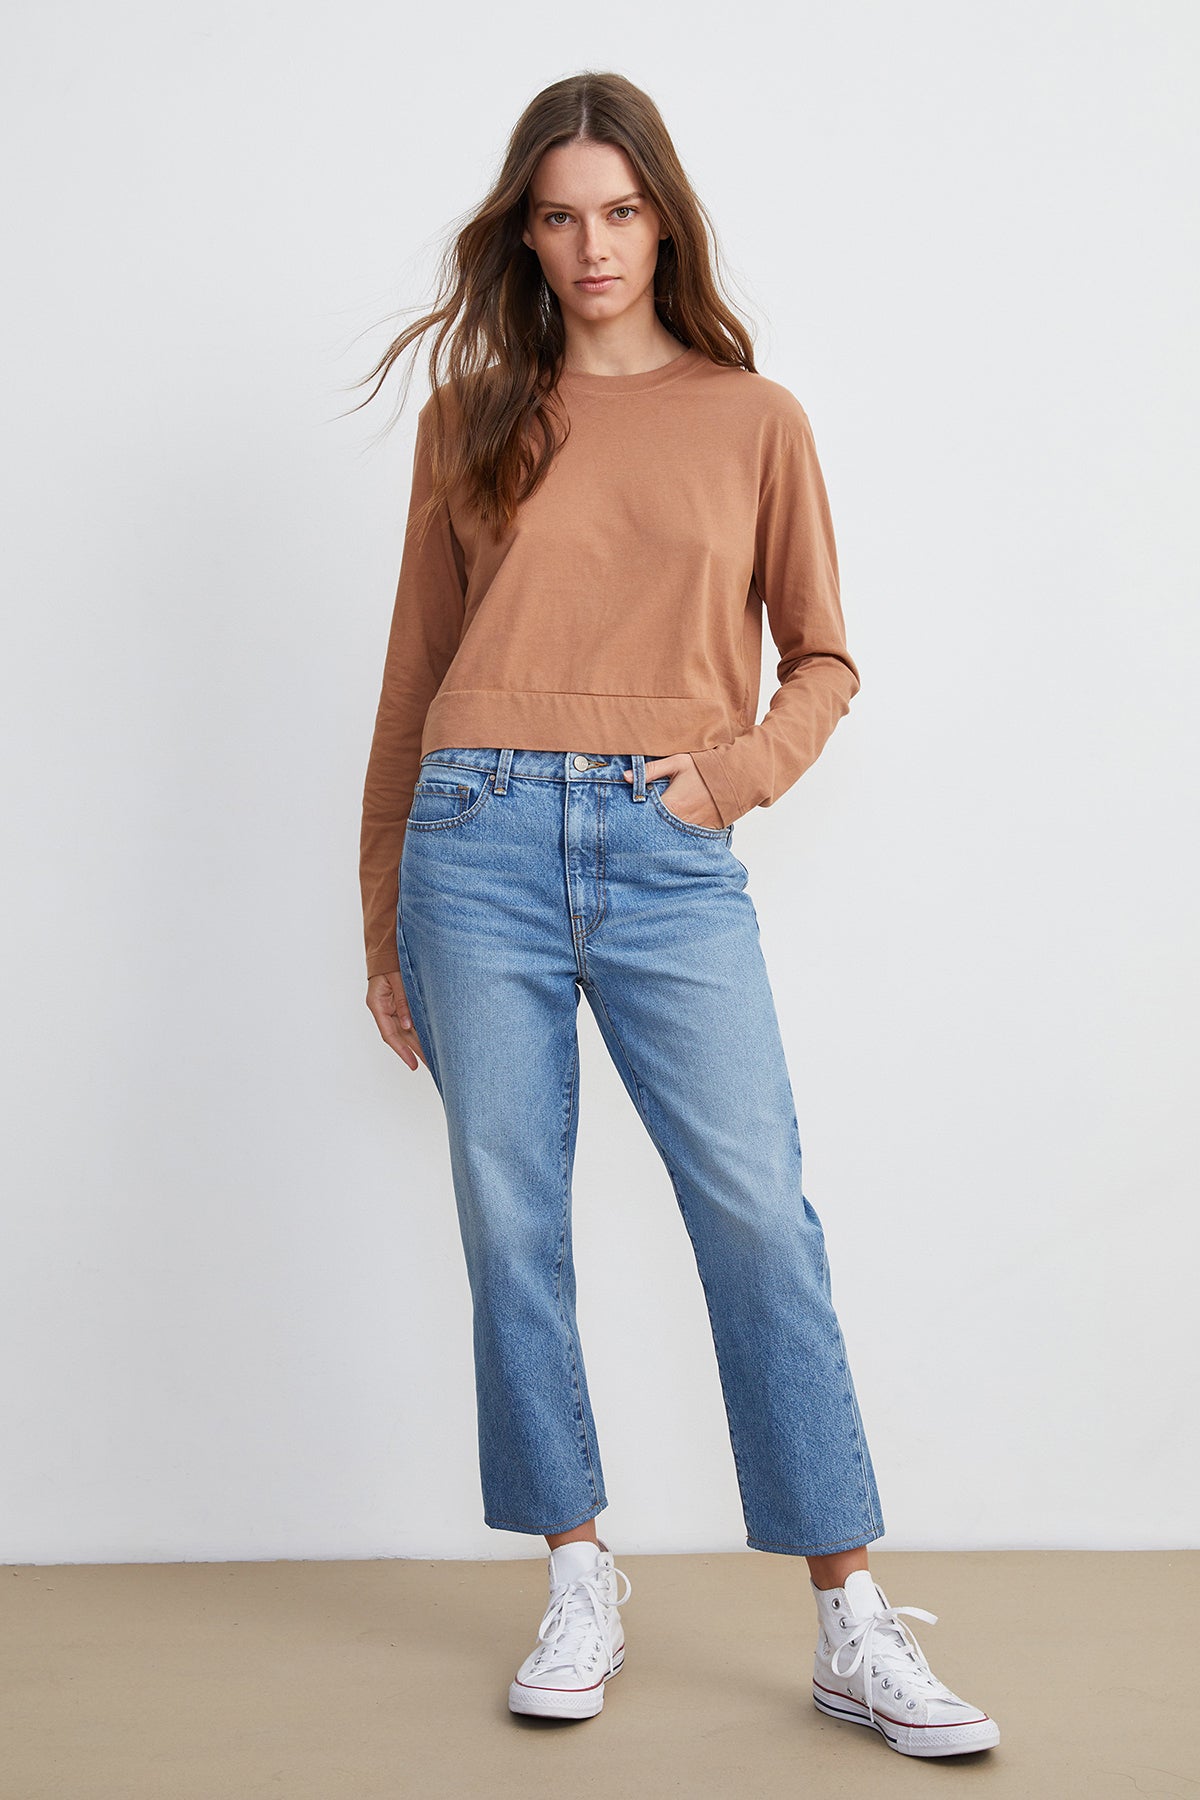 The model is wearing a tan sweatshirt and Velvet by Graham & Spencer's VICTORIA HI RISE STRAIGHT LEG JEAN during the weekend in Los Angeles.-7933097148497